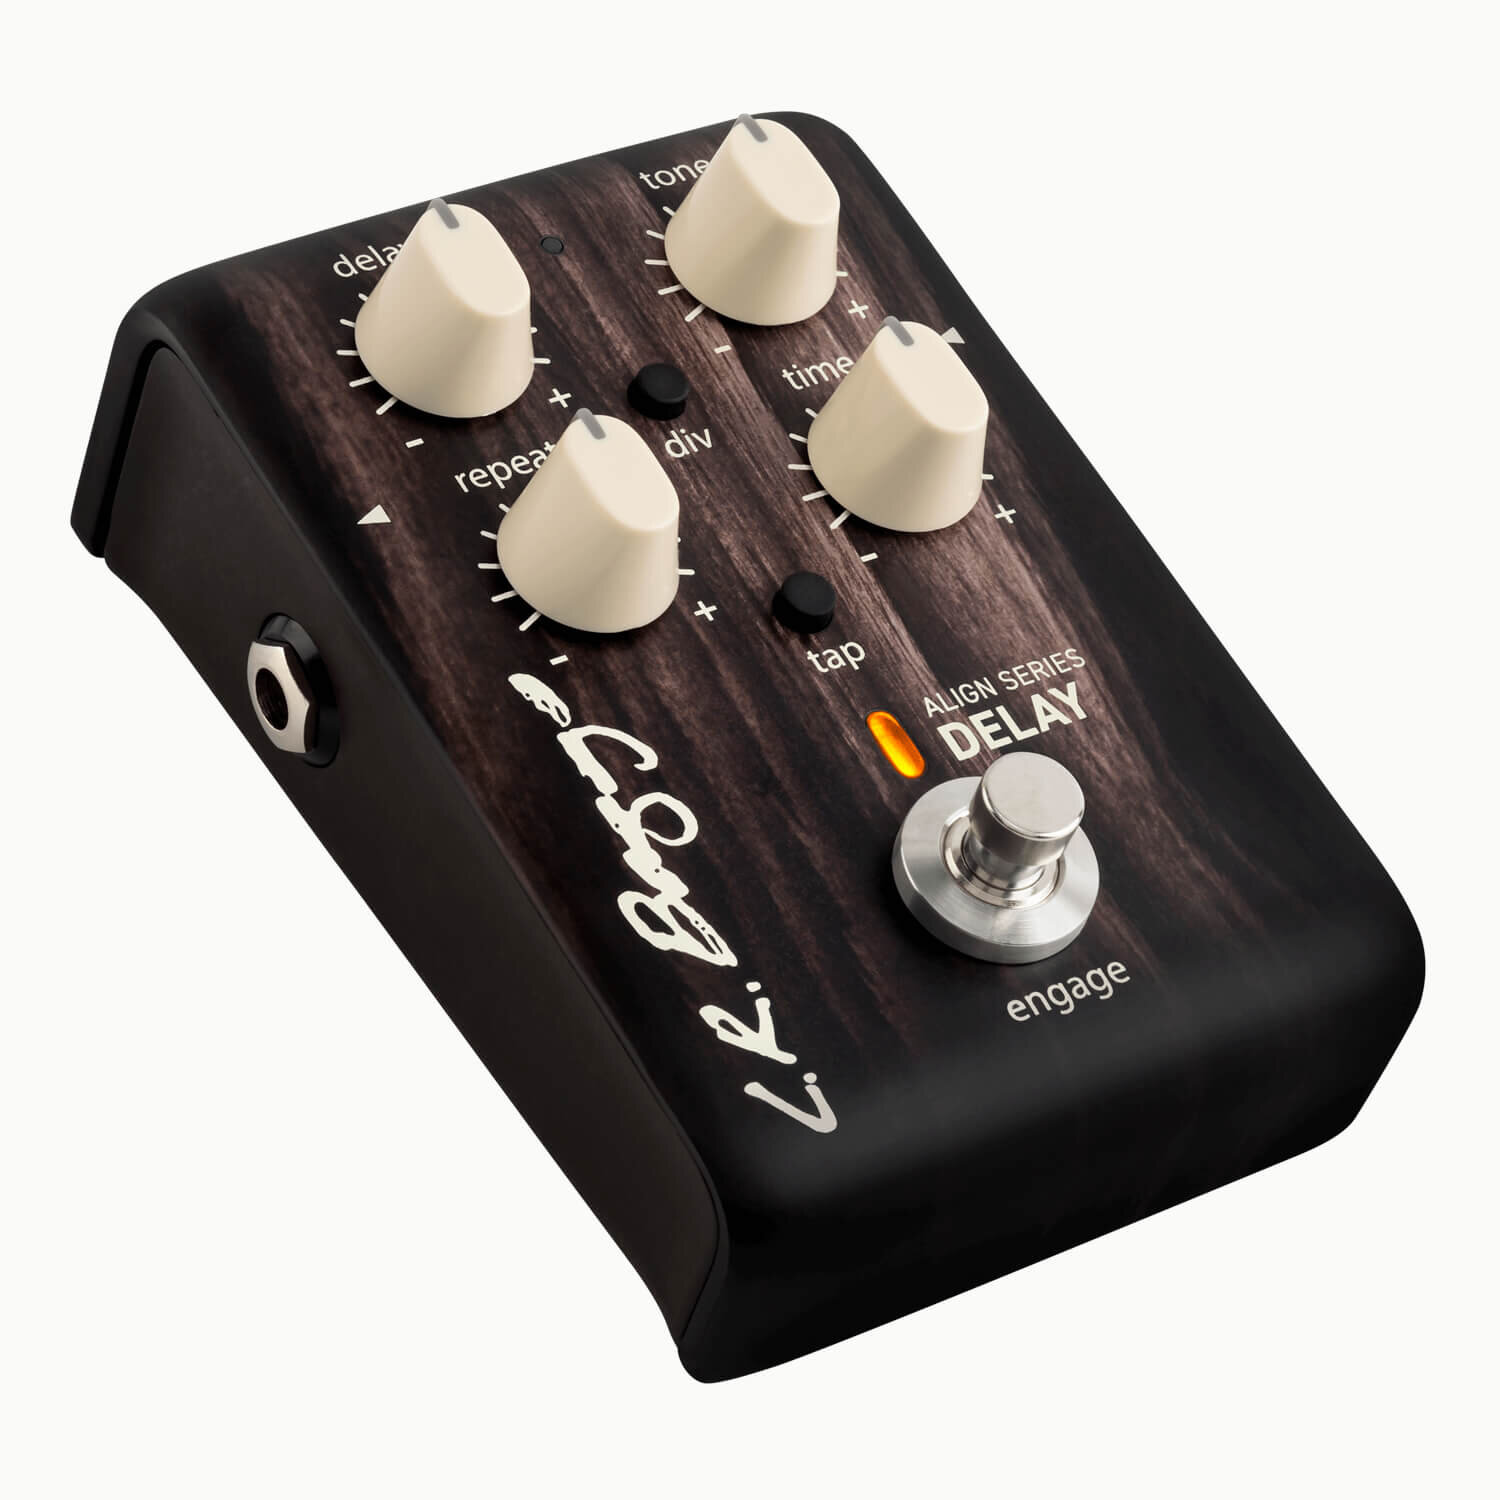 Align Series Delay Acoustic Pedal